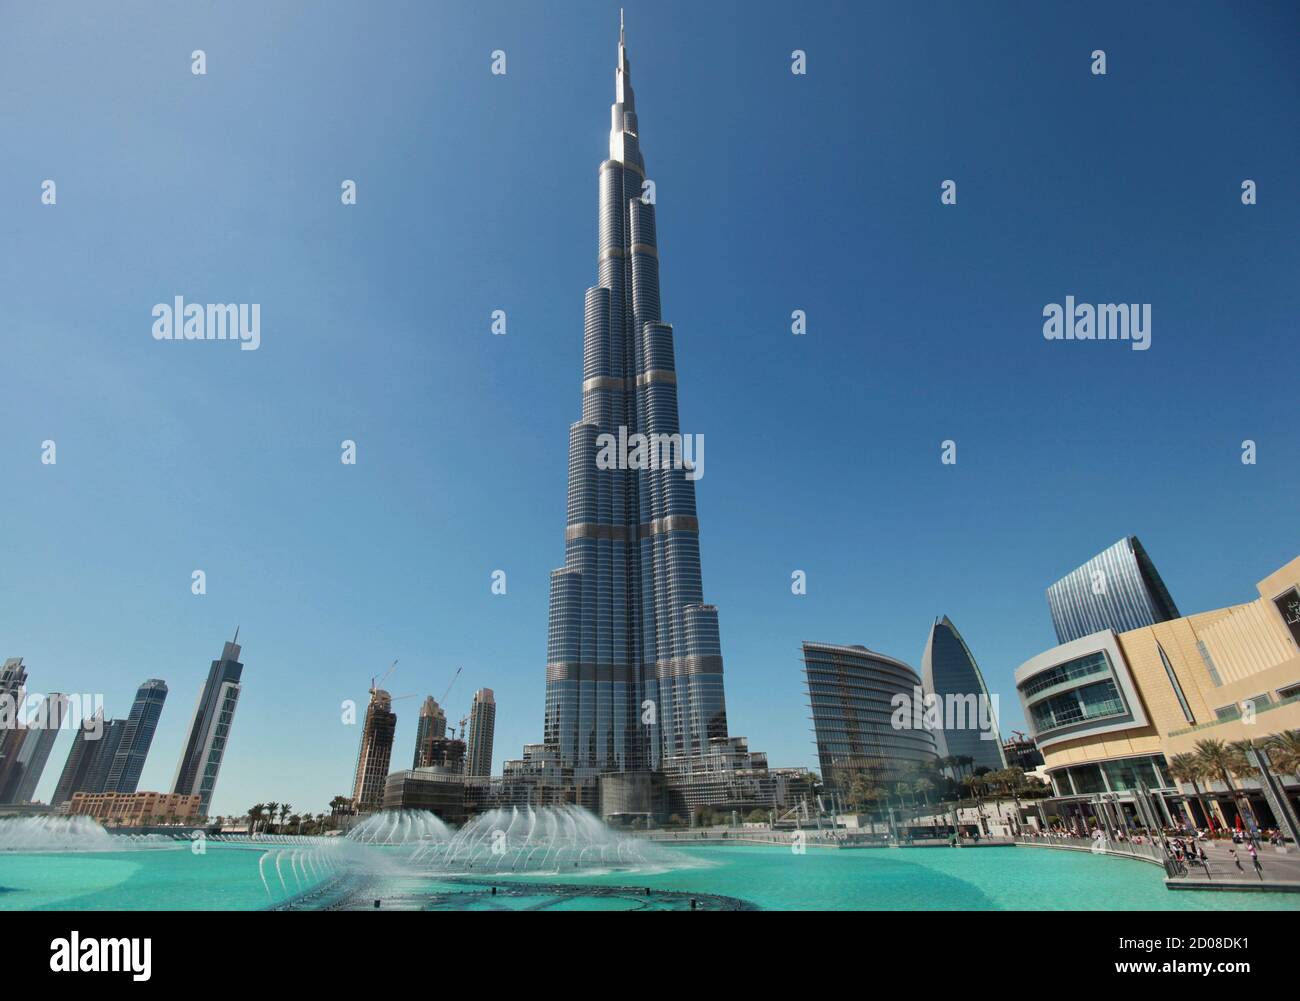 The Burj Khalifa, the world's tallest tower at a height of 828 metres  (2,717 feet), stands in Dubai March 5, 2012. REUTERS/Mohammed Salem (UNITED  ARAB EMIRATES - Tags: SOCIETY CITYSPACE Stock Photo - Alamy